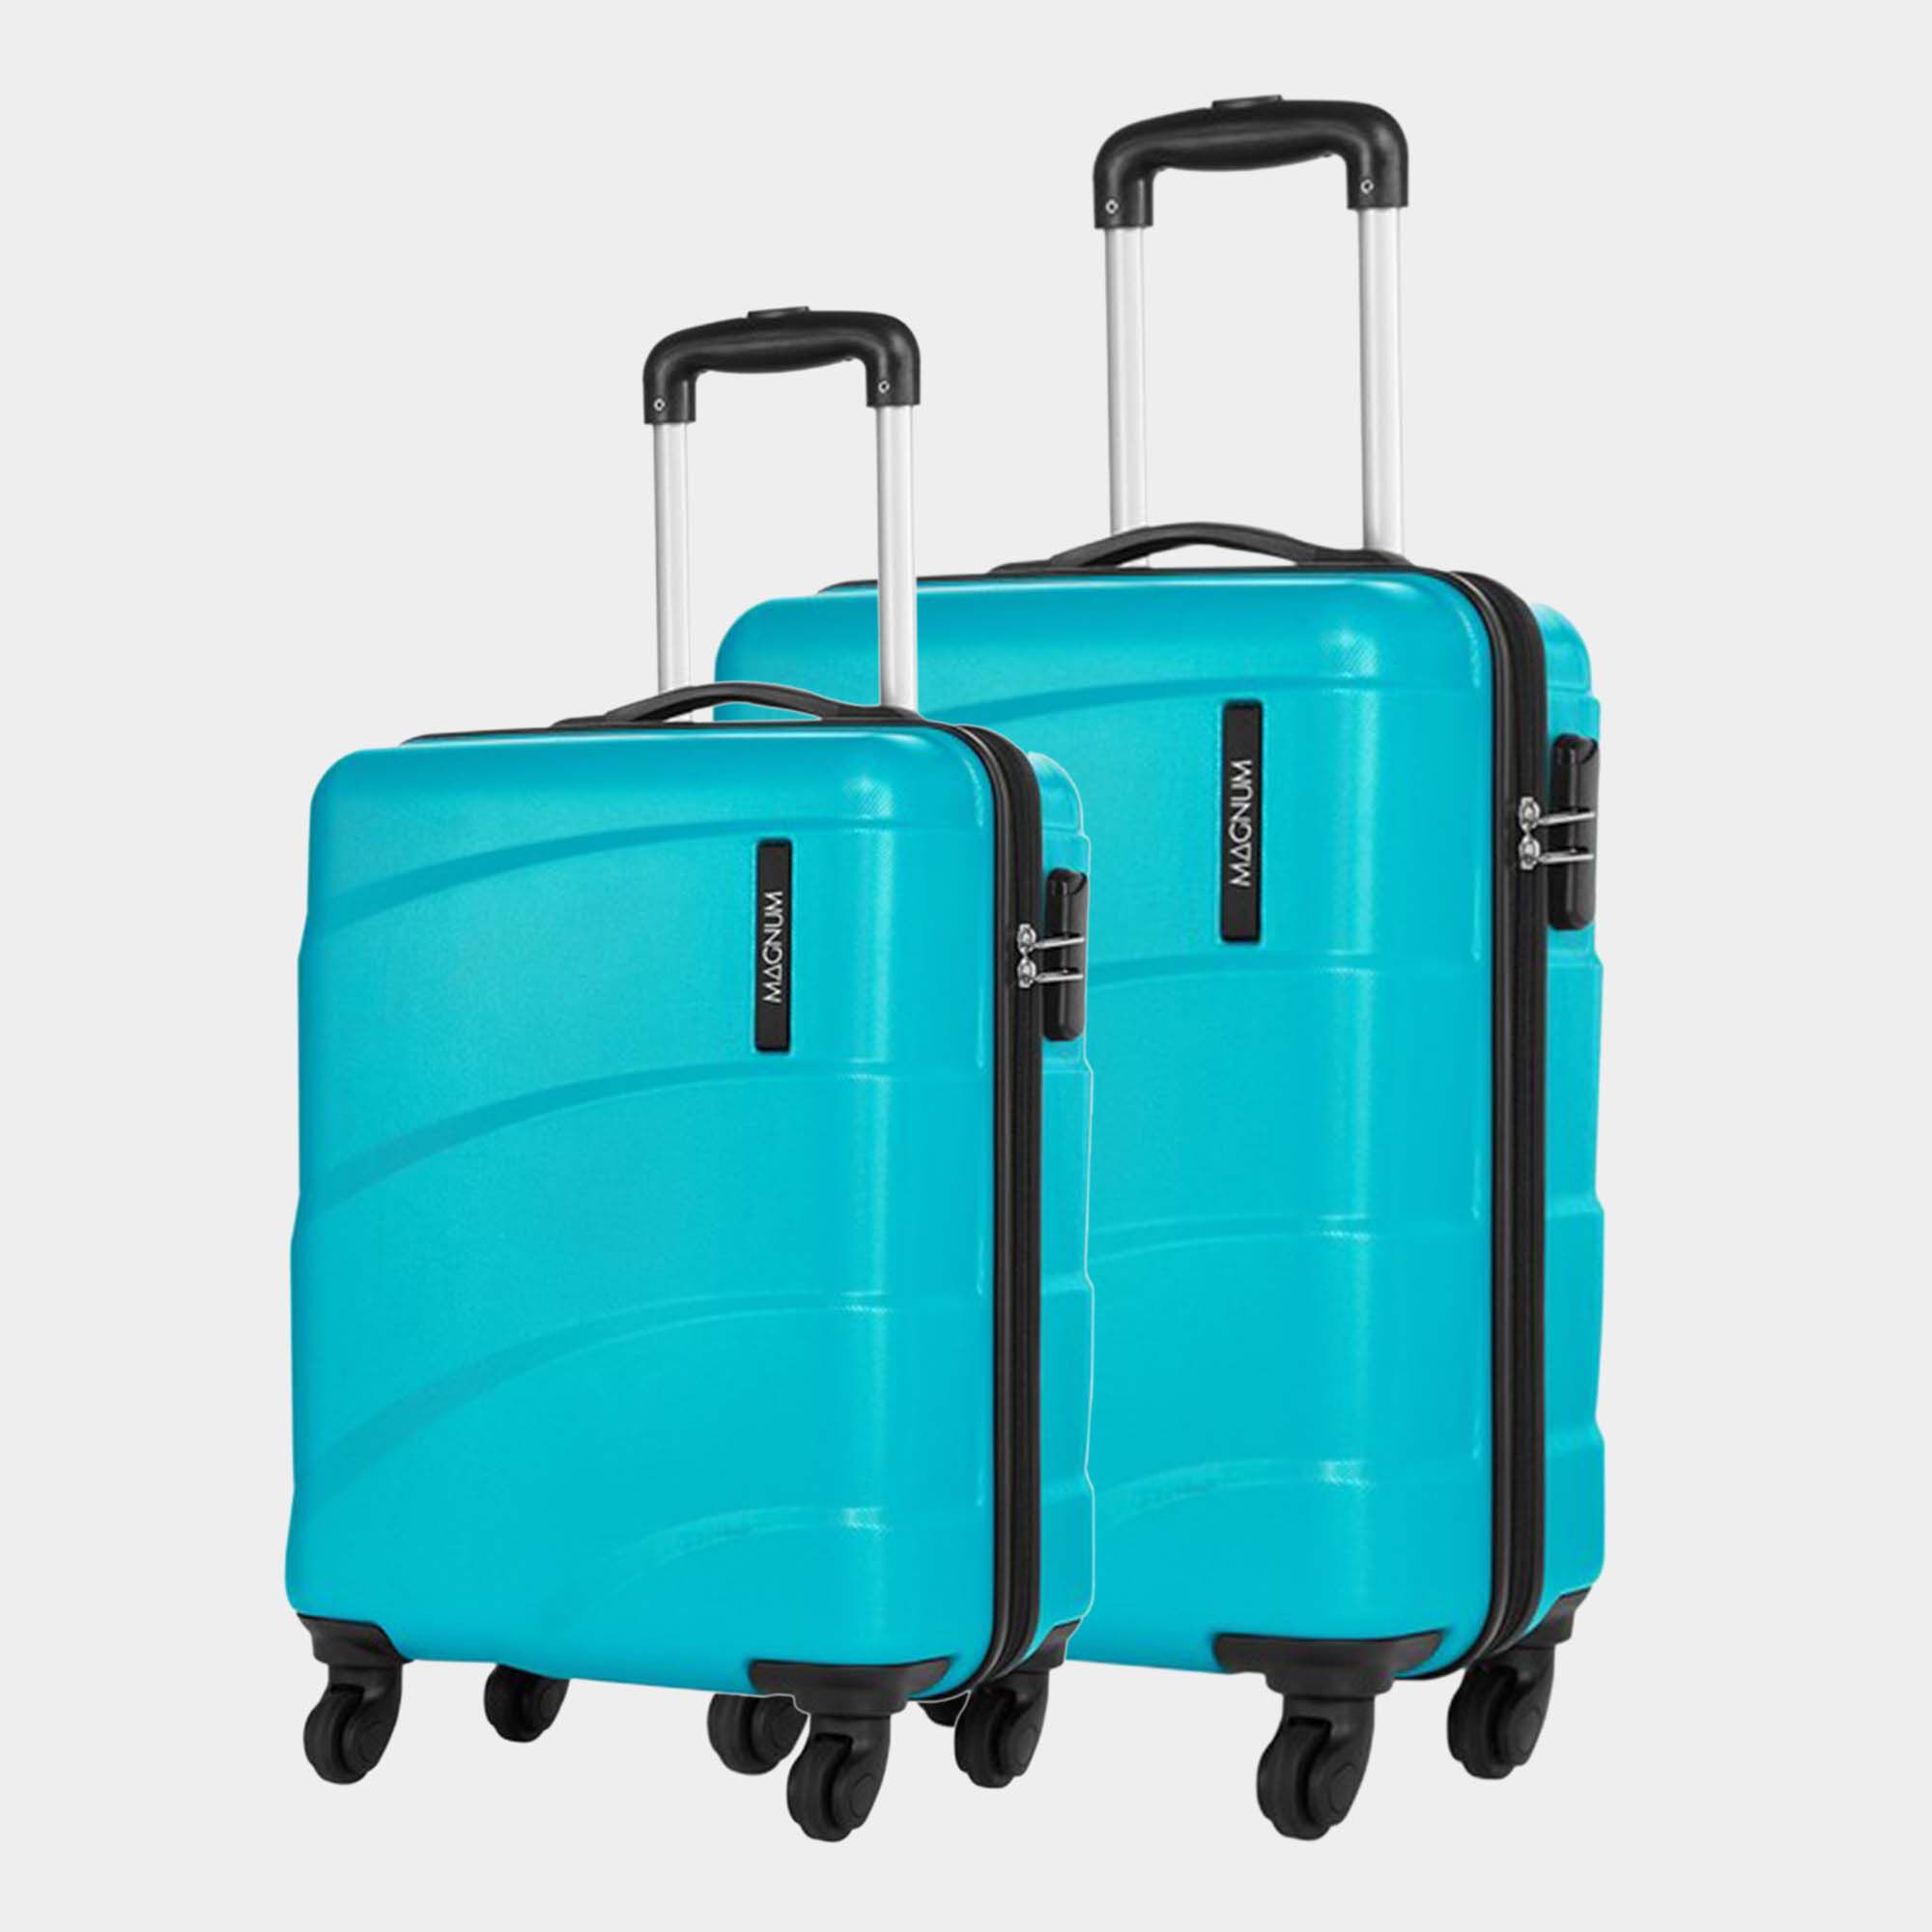 American Tourister Trolley Bag for Travel | Splash 55 Cms Polycarbonate  Hardsided Small Cabin Luggage Bag